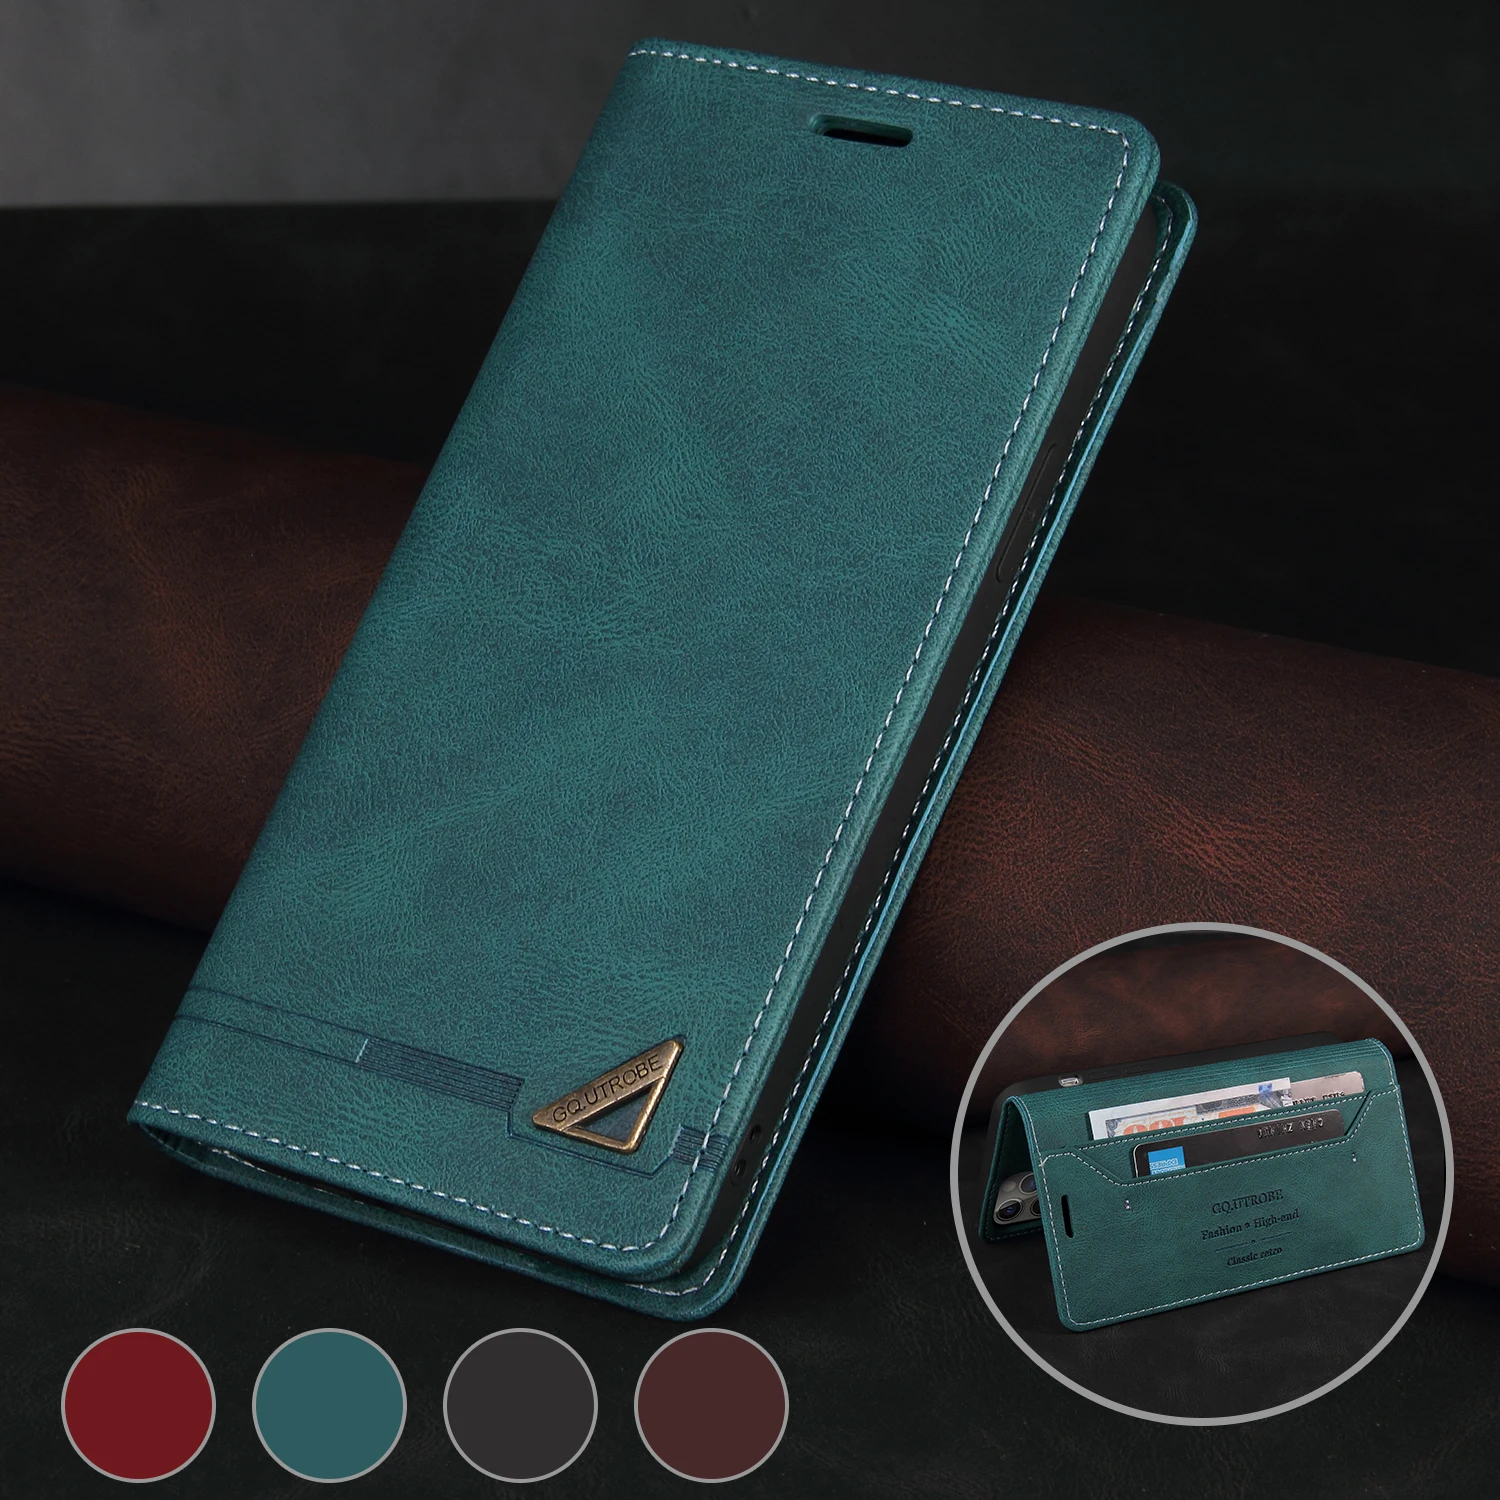 Leather Wallet Case For Samsung Galaxy M02 M10S M11 M12 M22 M31 M31S M32 M40S M42 M51 F62 J3 J5 J7 2017 J8 2018 Phone Case Cover 1